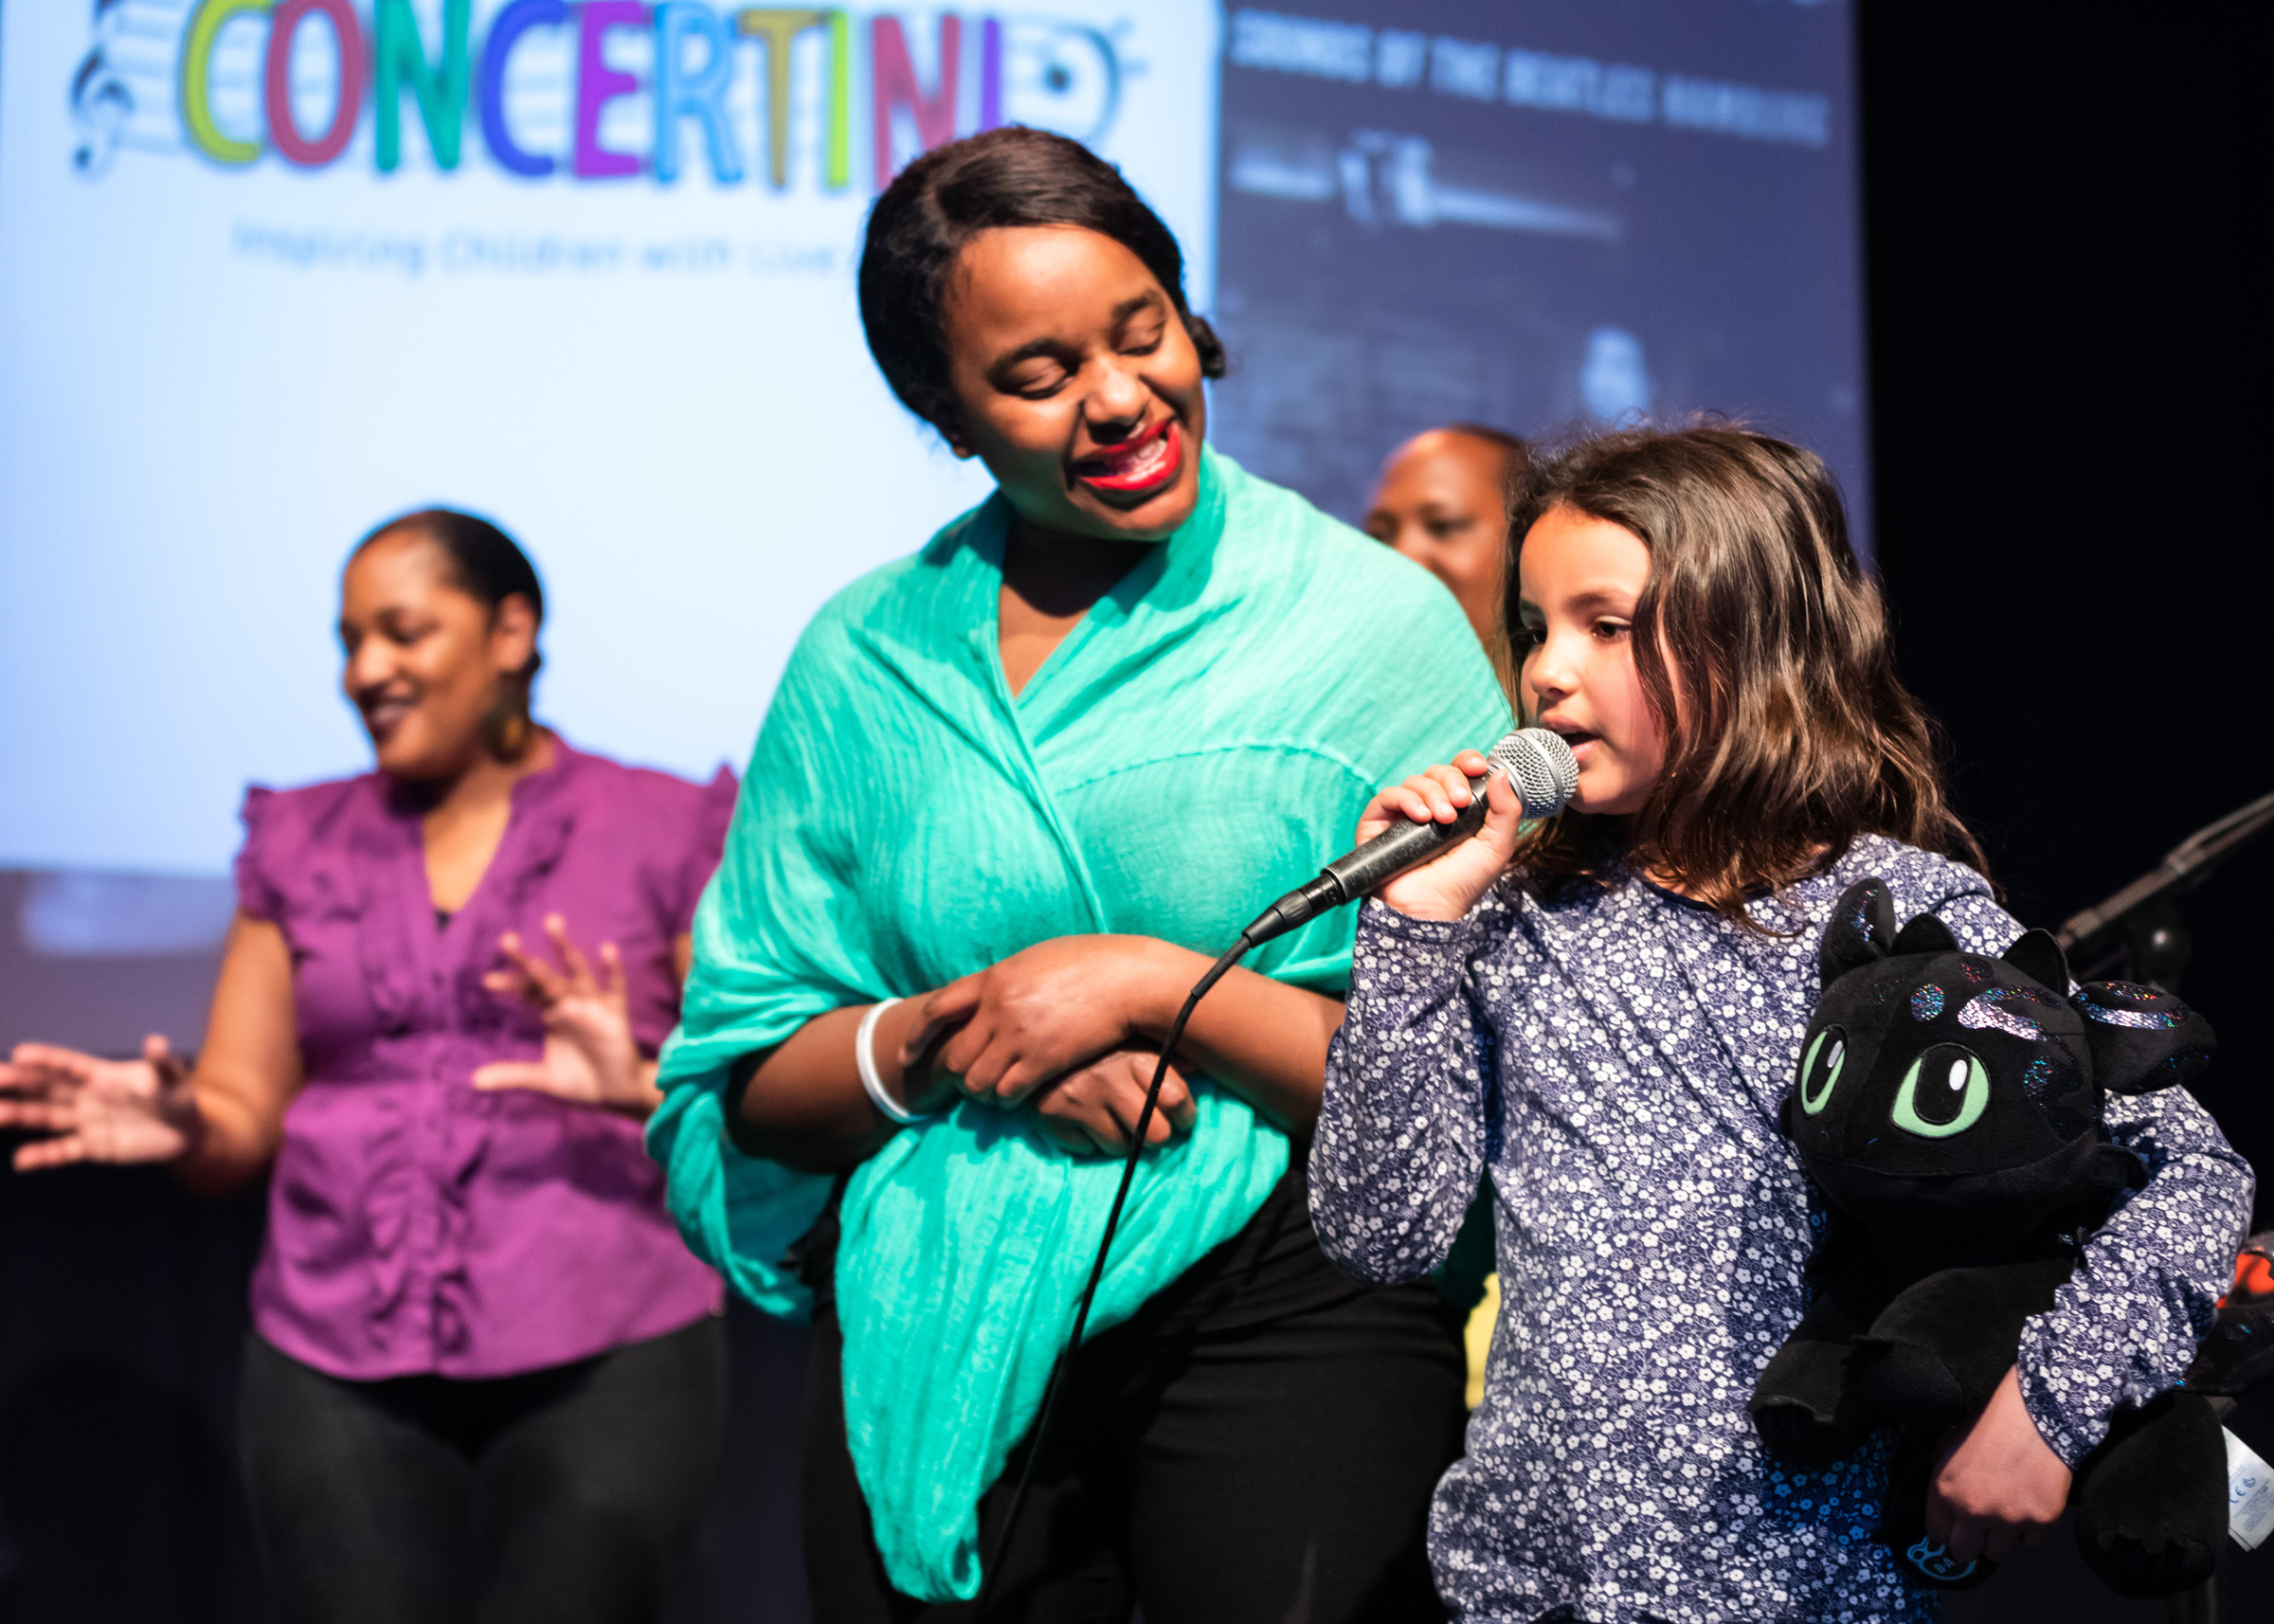 A child is speaking into a microphone at a concertini performance. An adult is standing beside the child, looking encouraging.